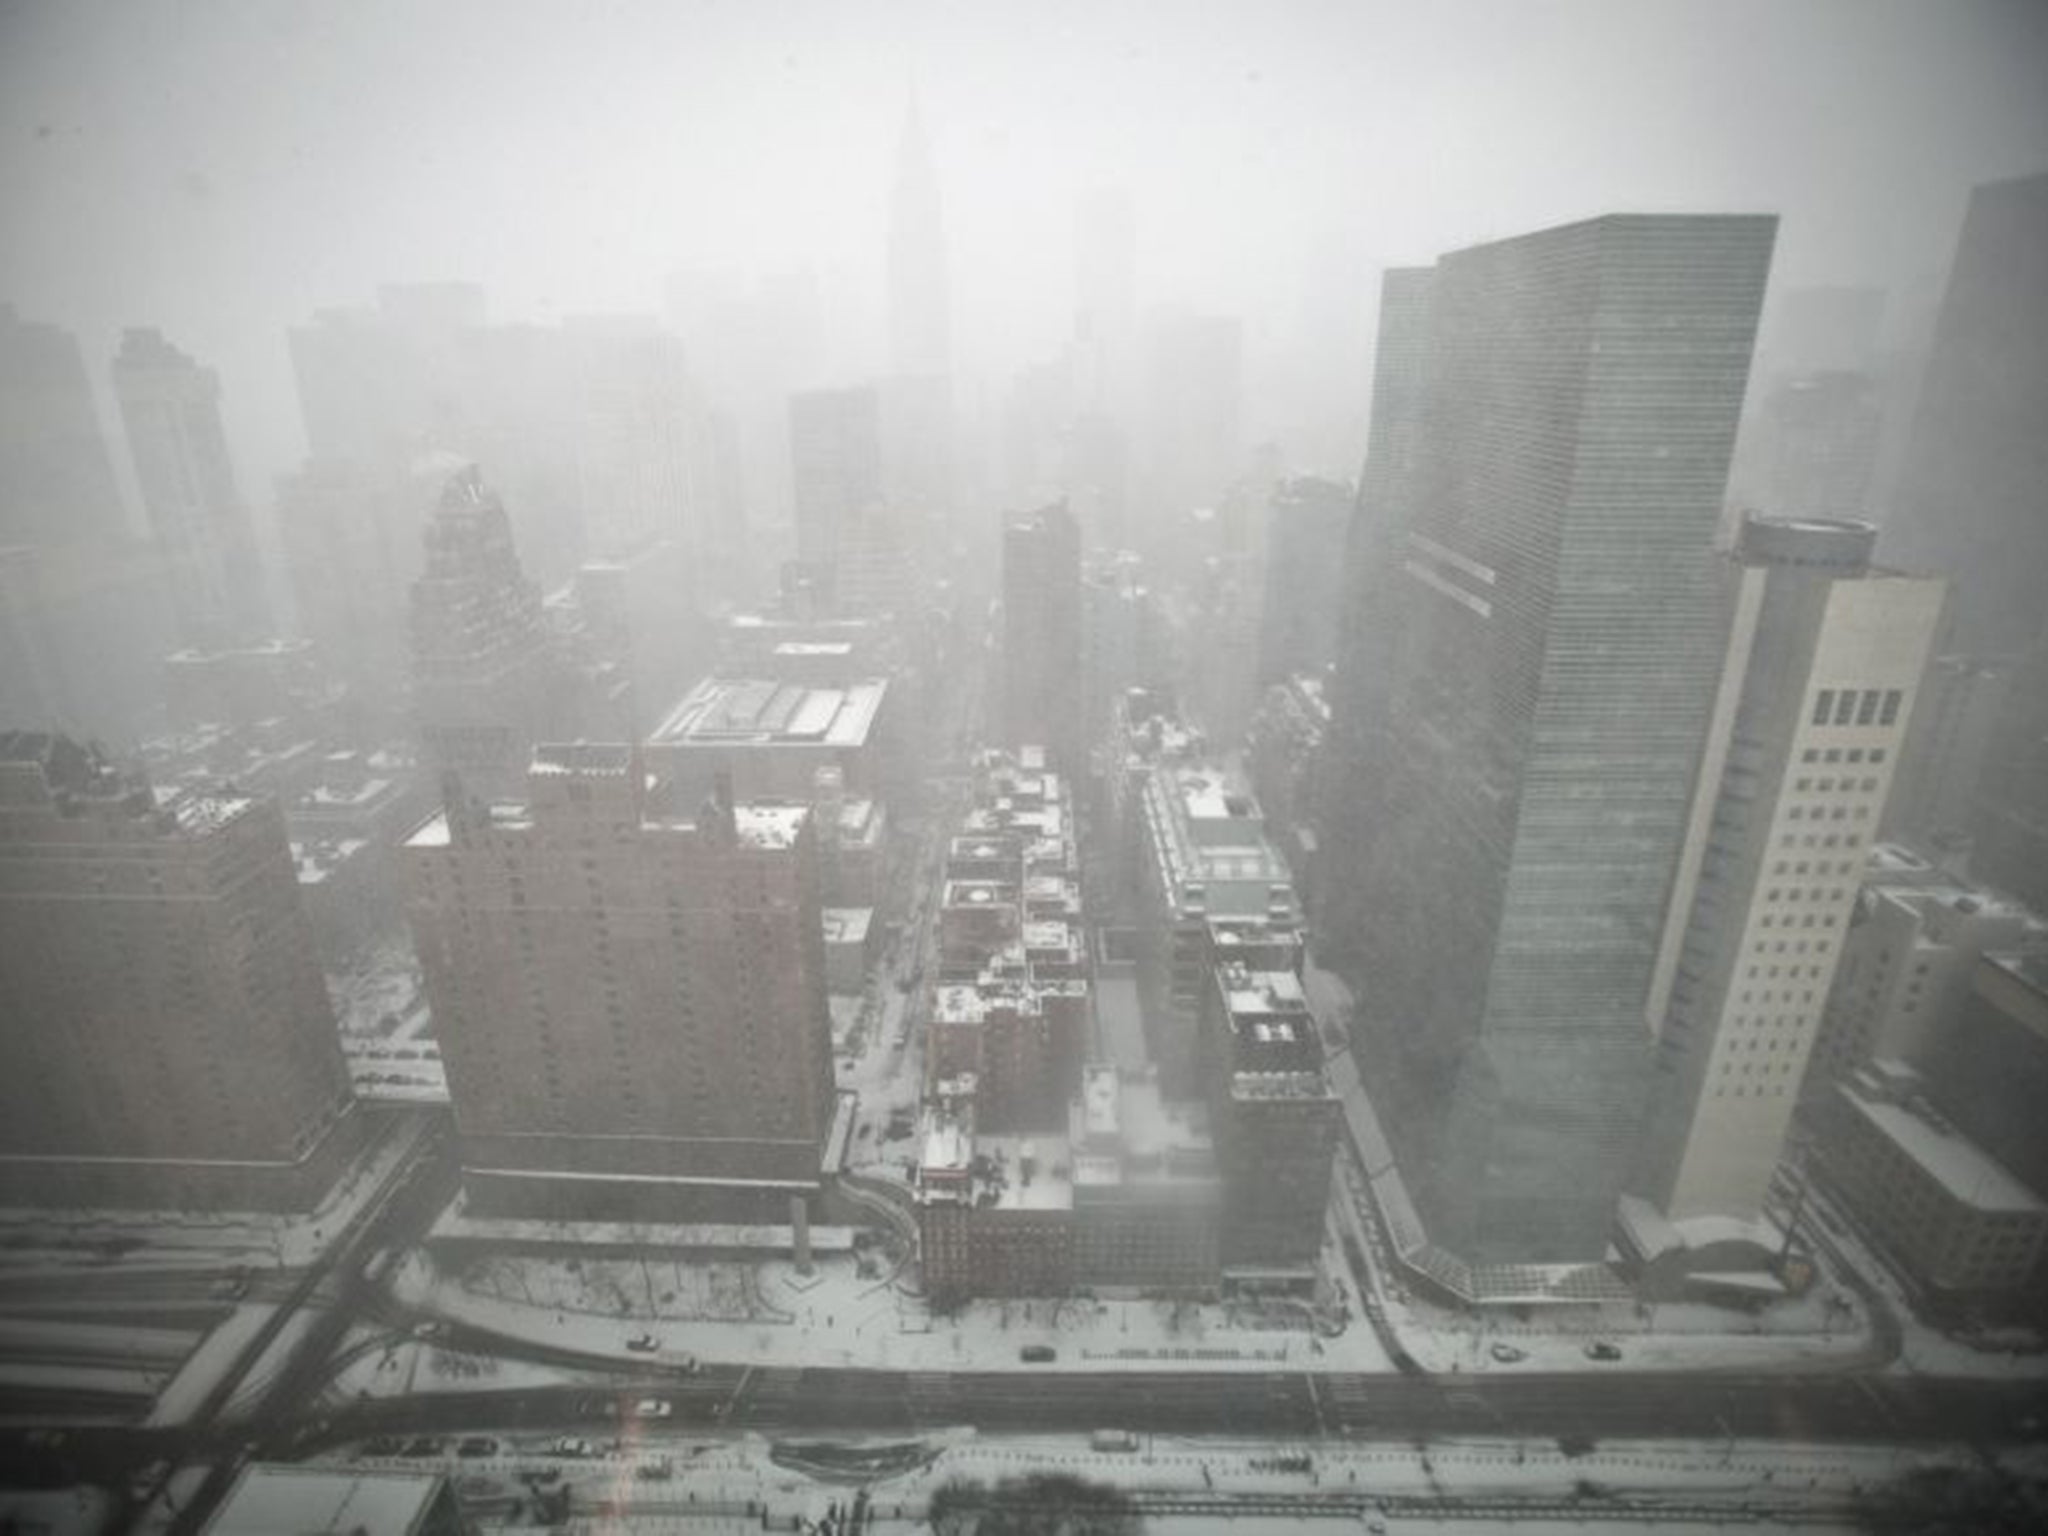 Mid-town Manhattan as pictured from the top of the United Nations building in New York; Juno has brought a blizzard warning for the city as well as much of the North East United States